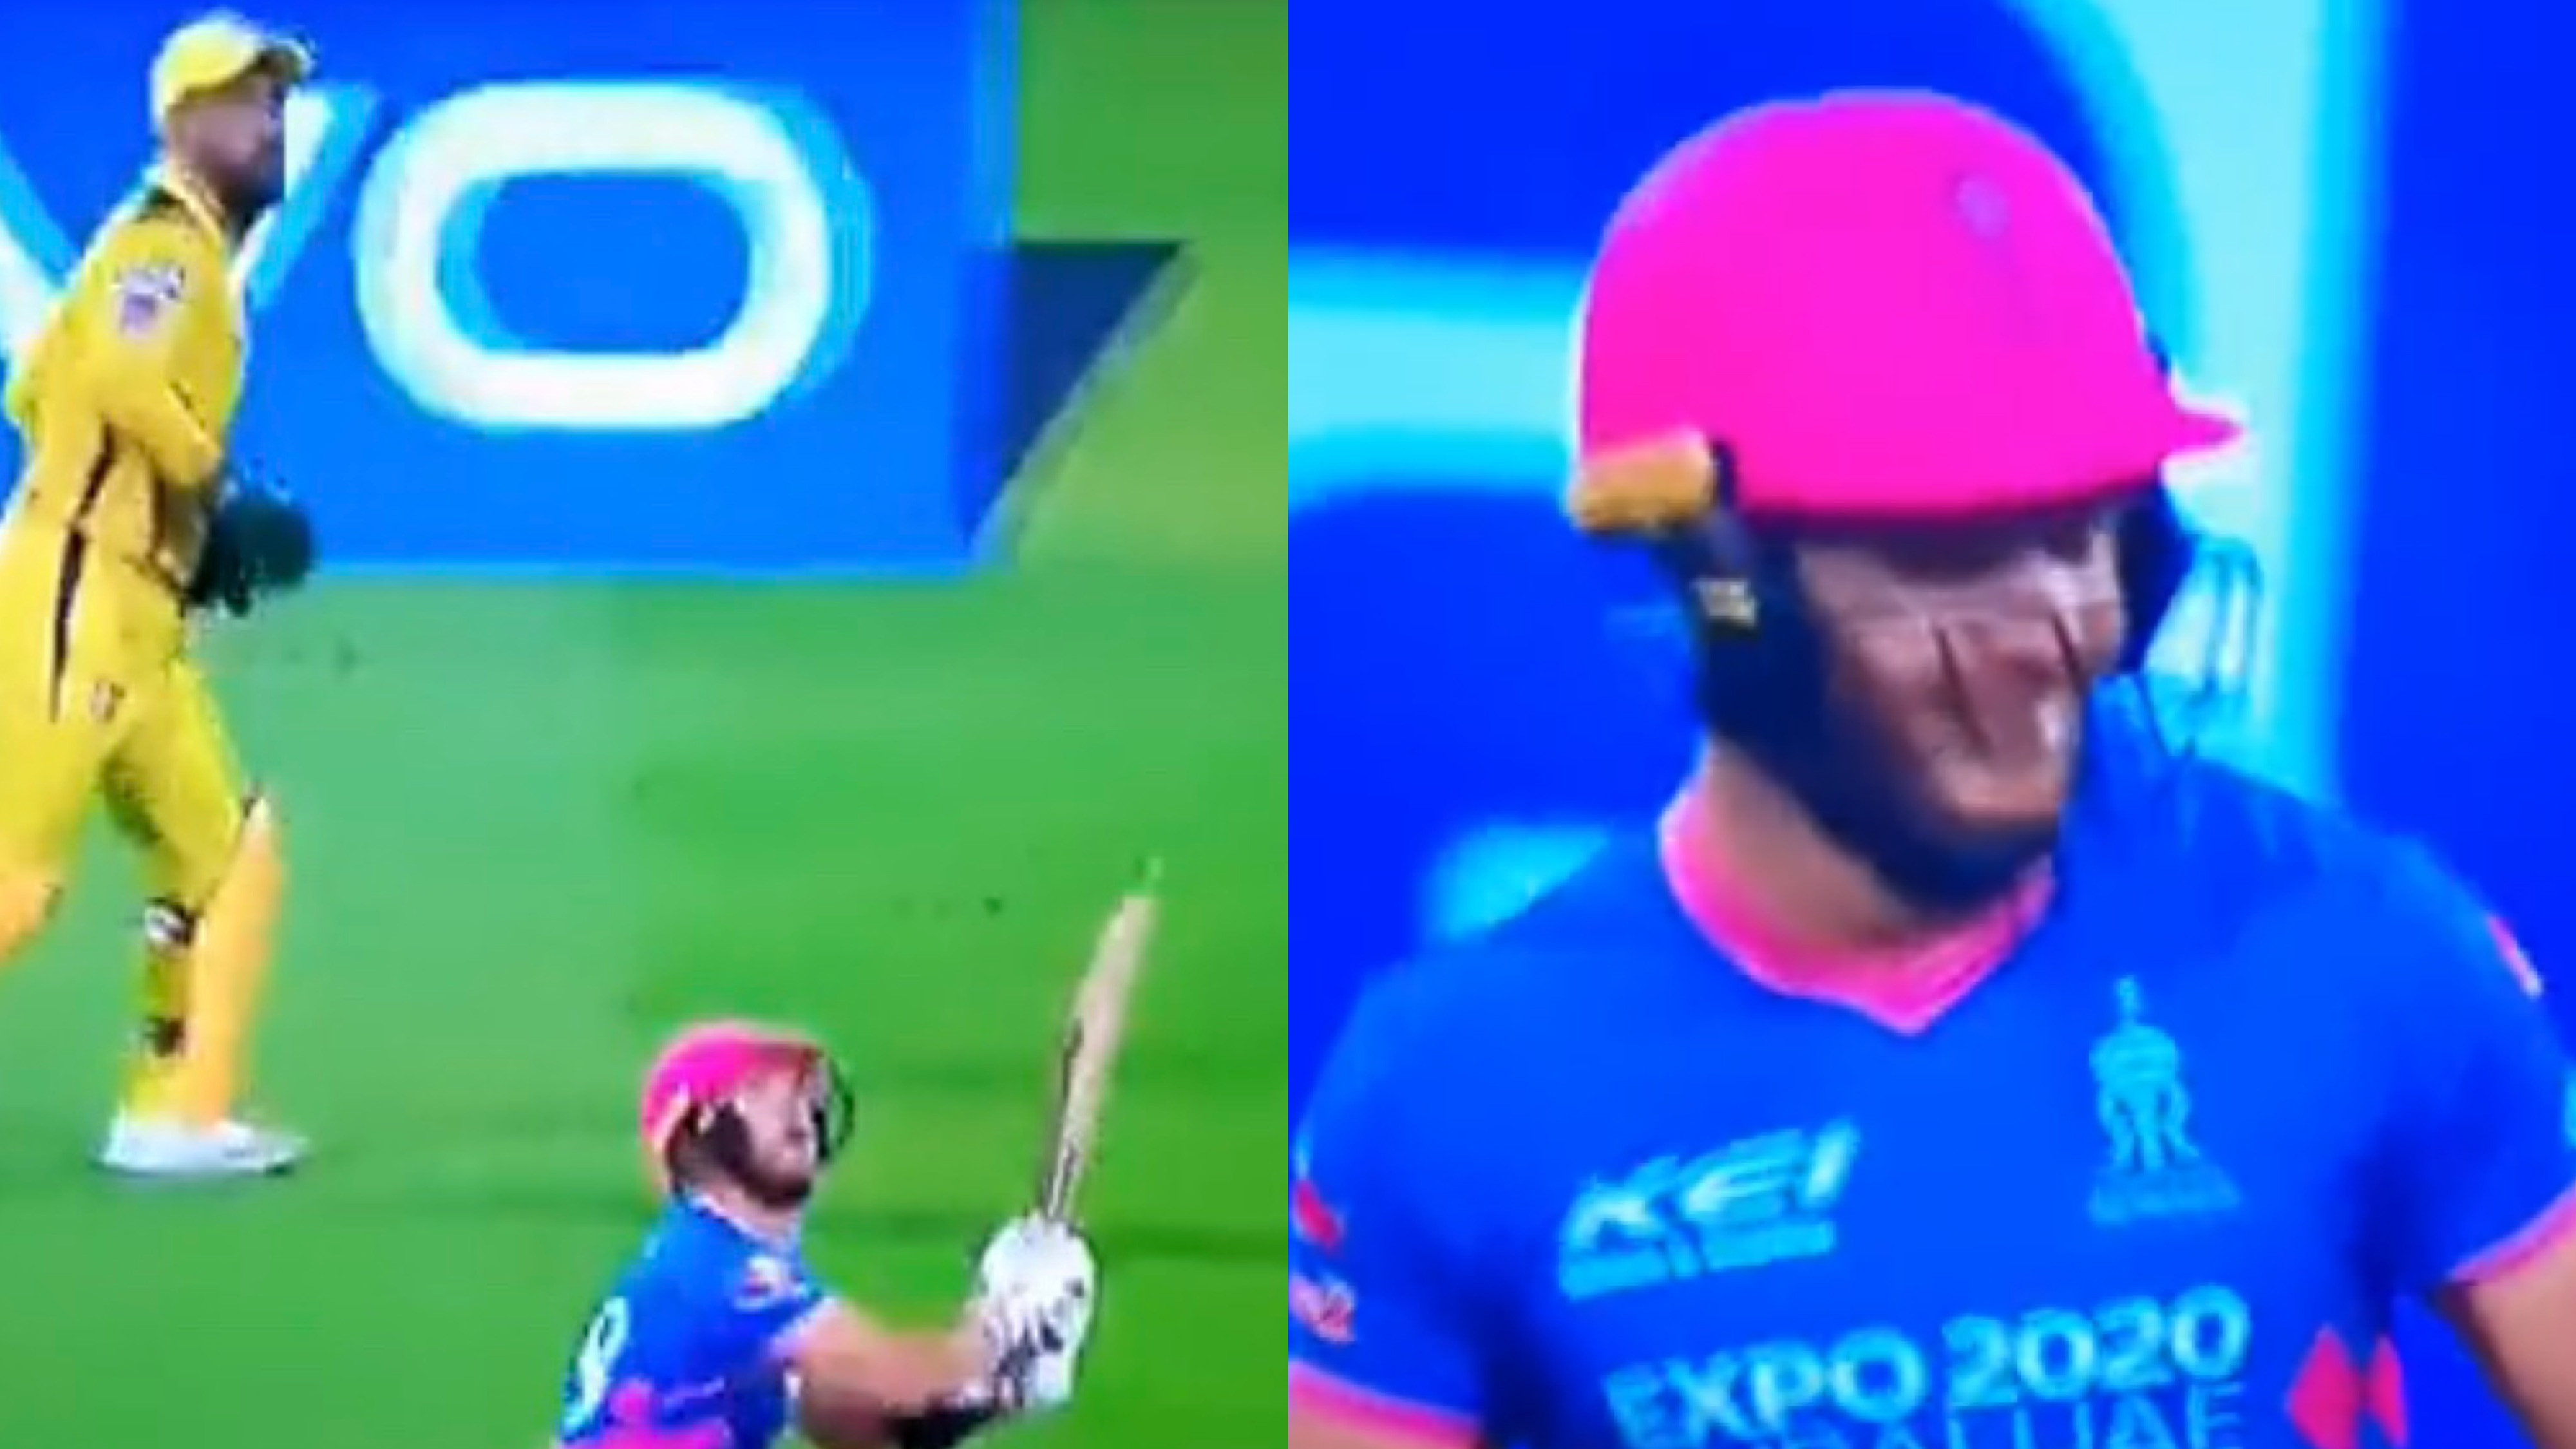 IPL 2021: WATCH - Glenn Phillips runs off to hit the ball after it slipped from Sam Curran's hand